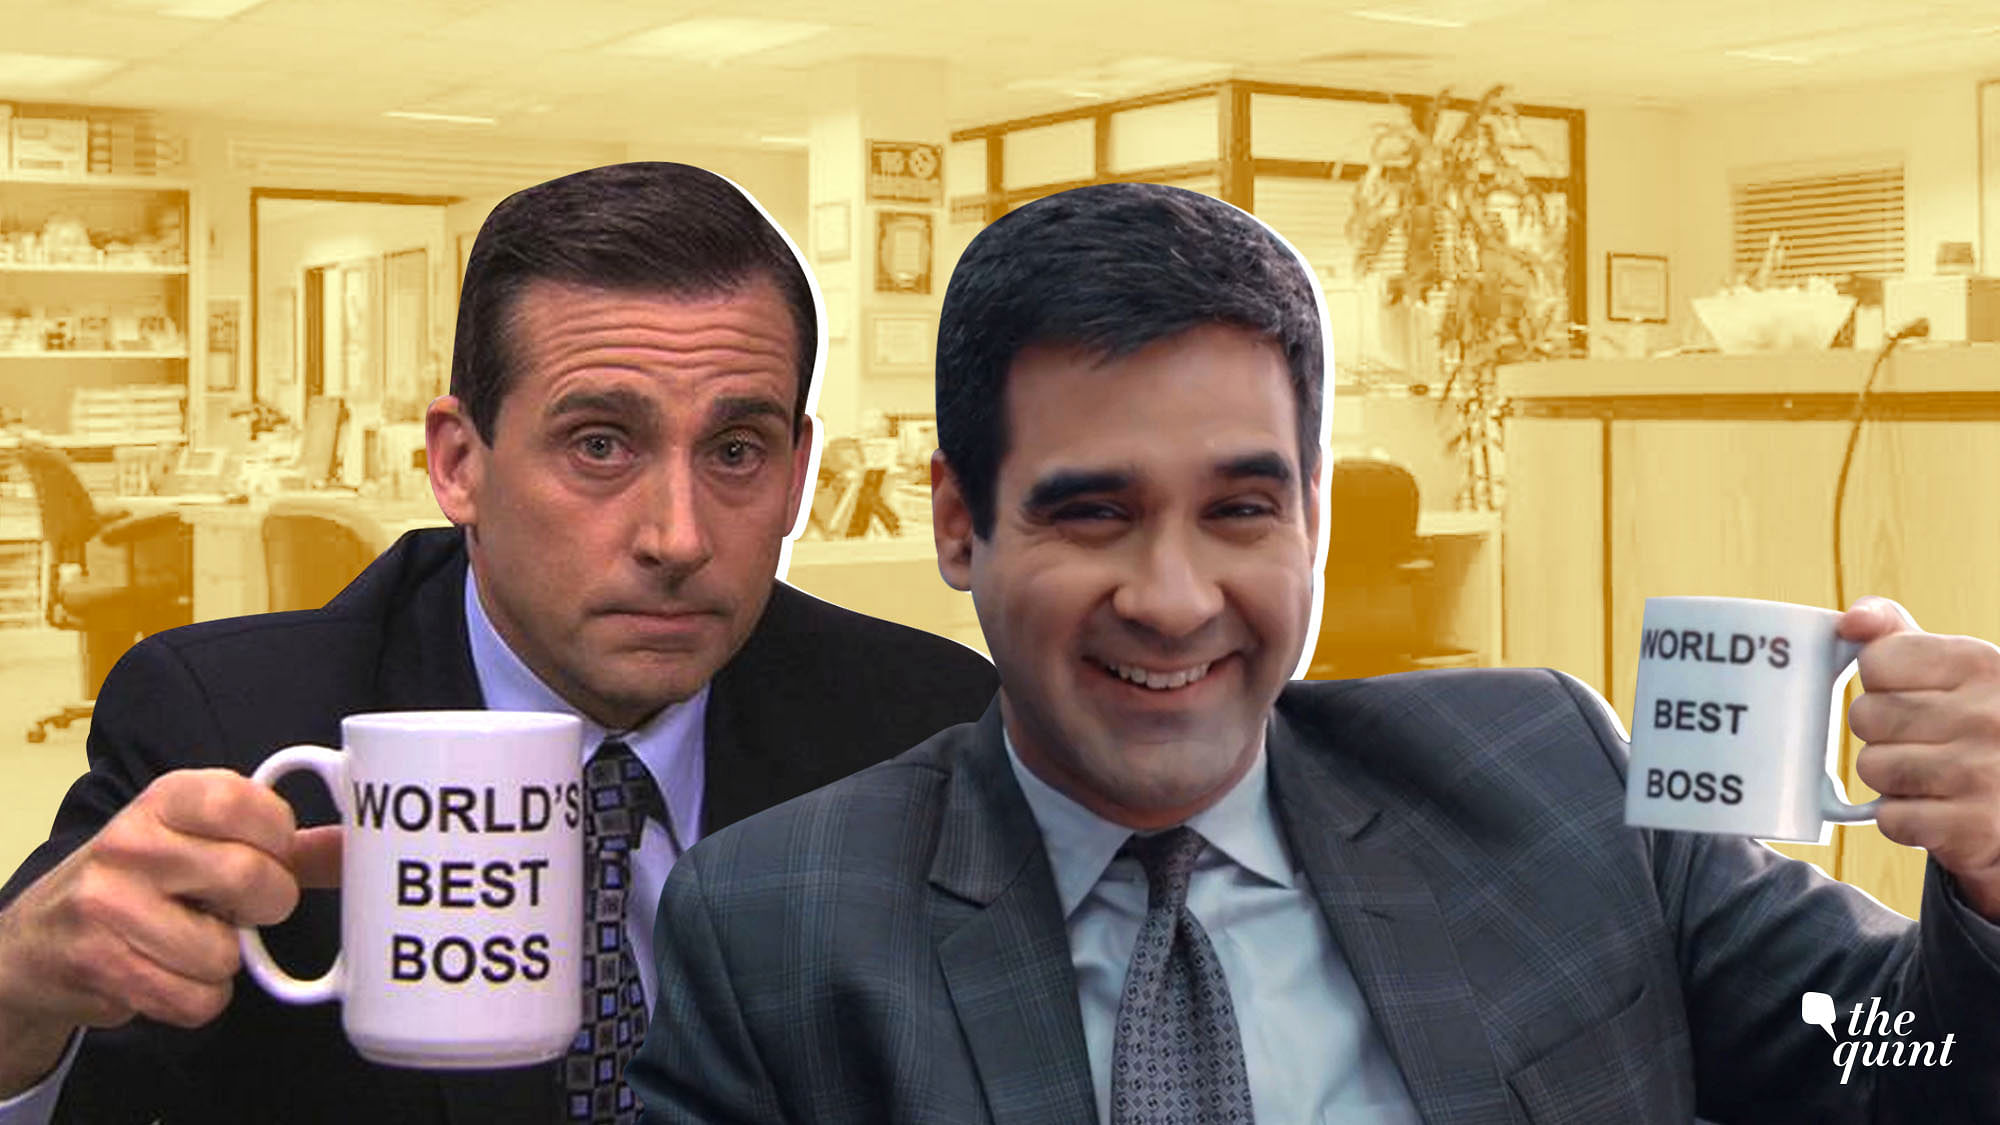 Steve Carell’s iconic character Michael Scott is Jagdeep Chaddha in the Indian adaptation.